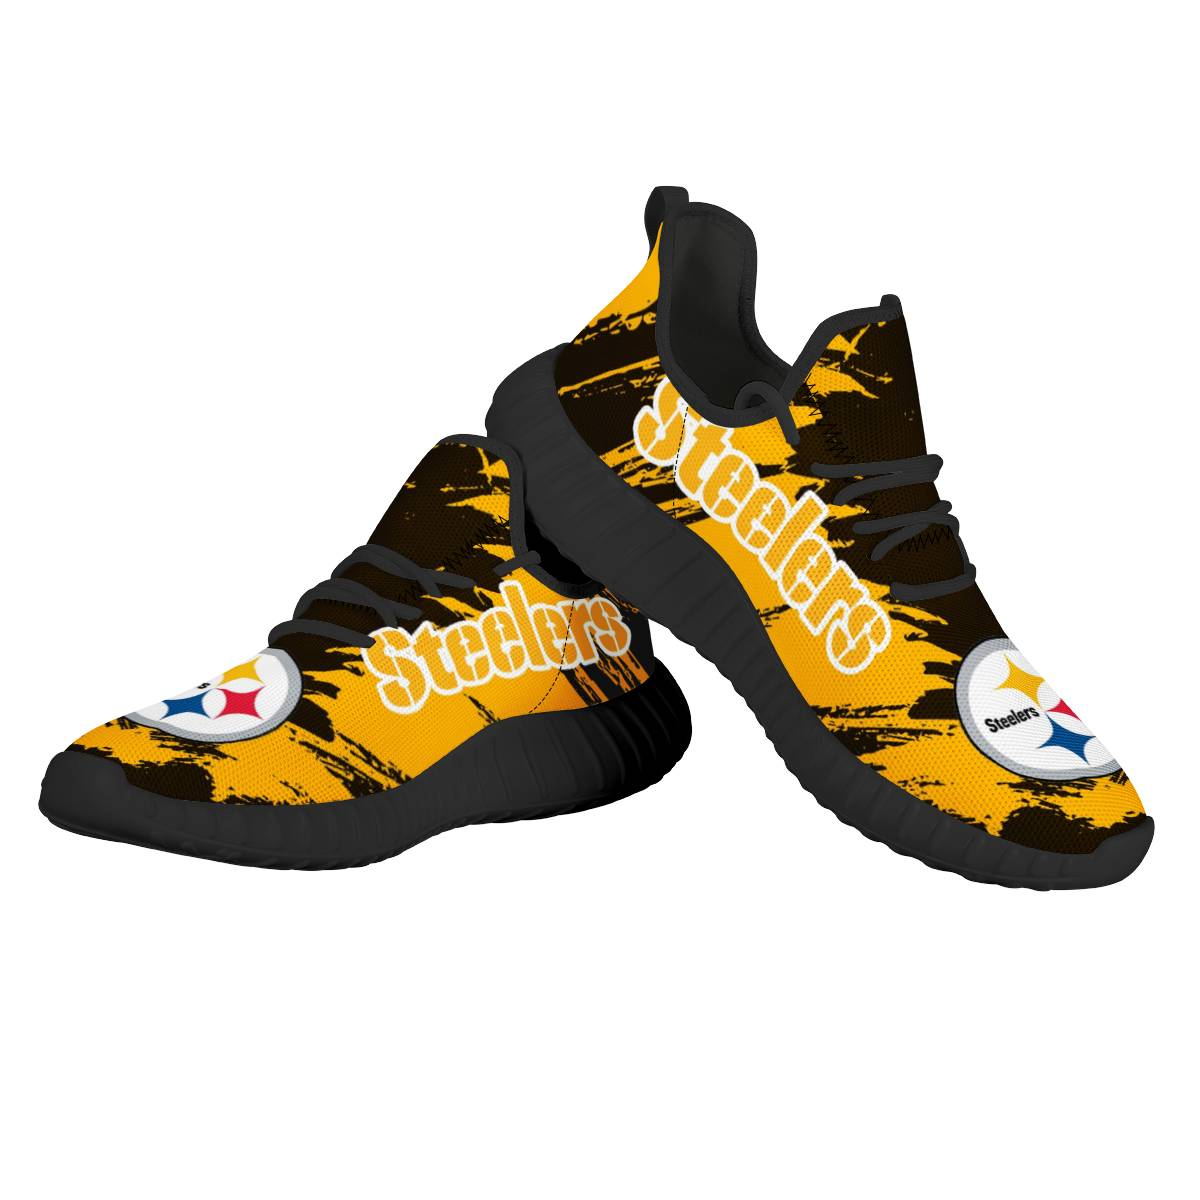 Men's NFL Pittsburgh Steelers Mesh Knit Sneakers/Shoes 003